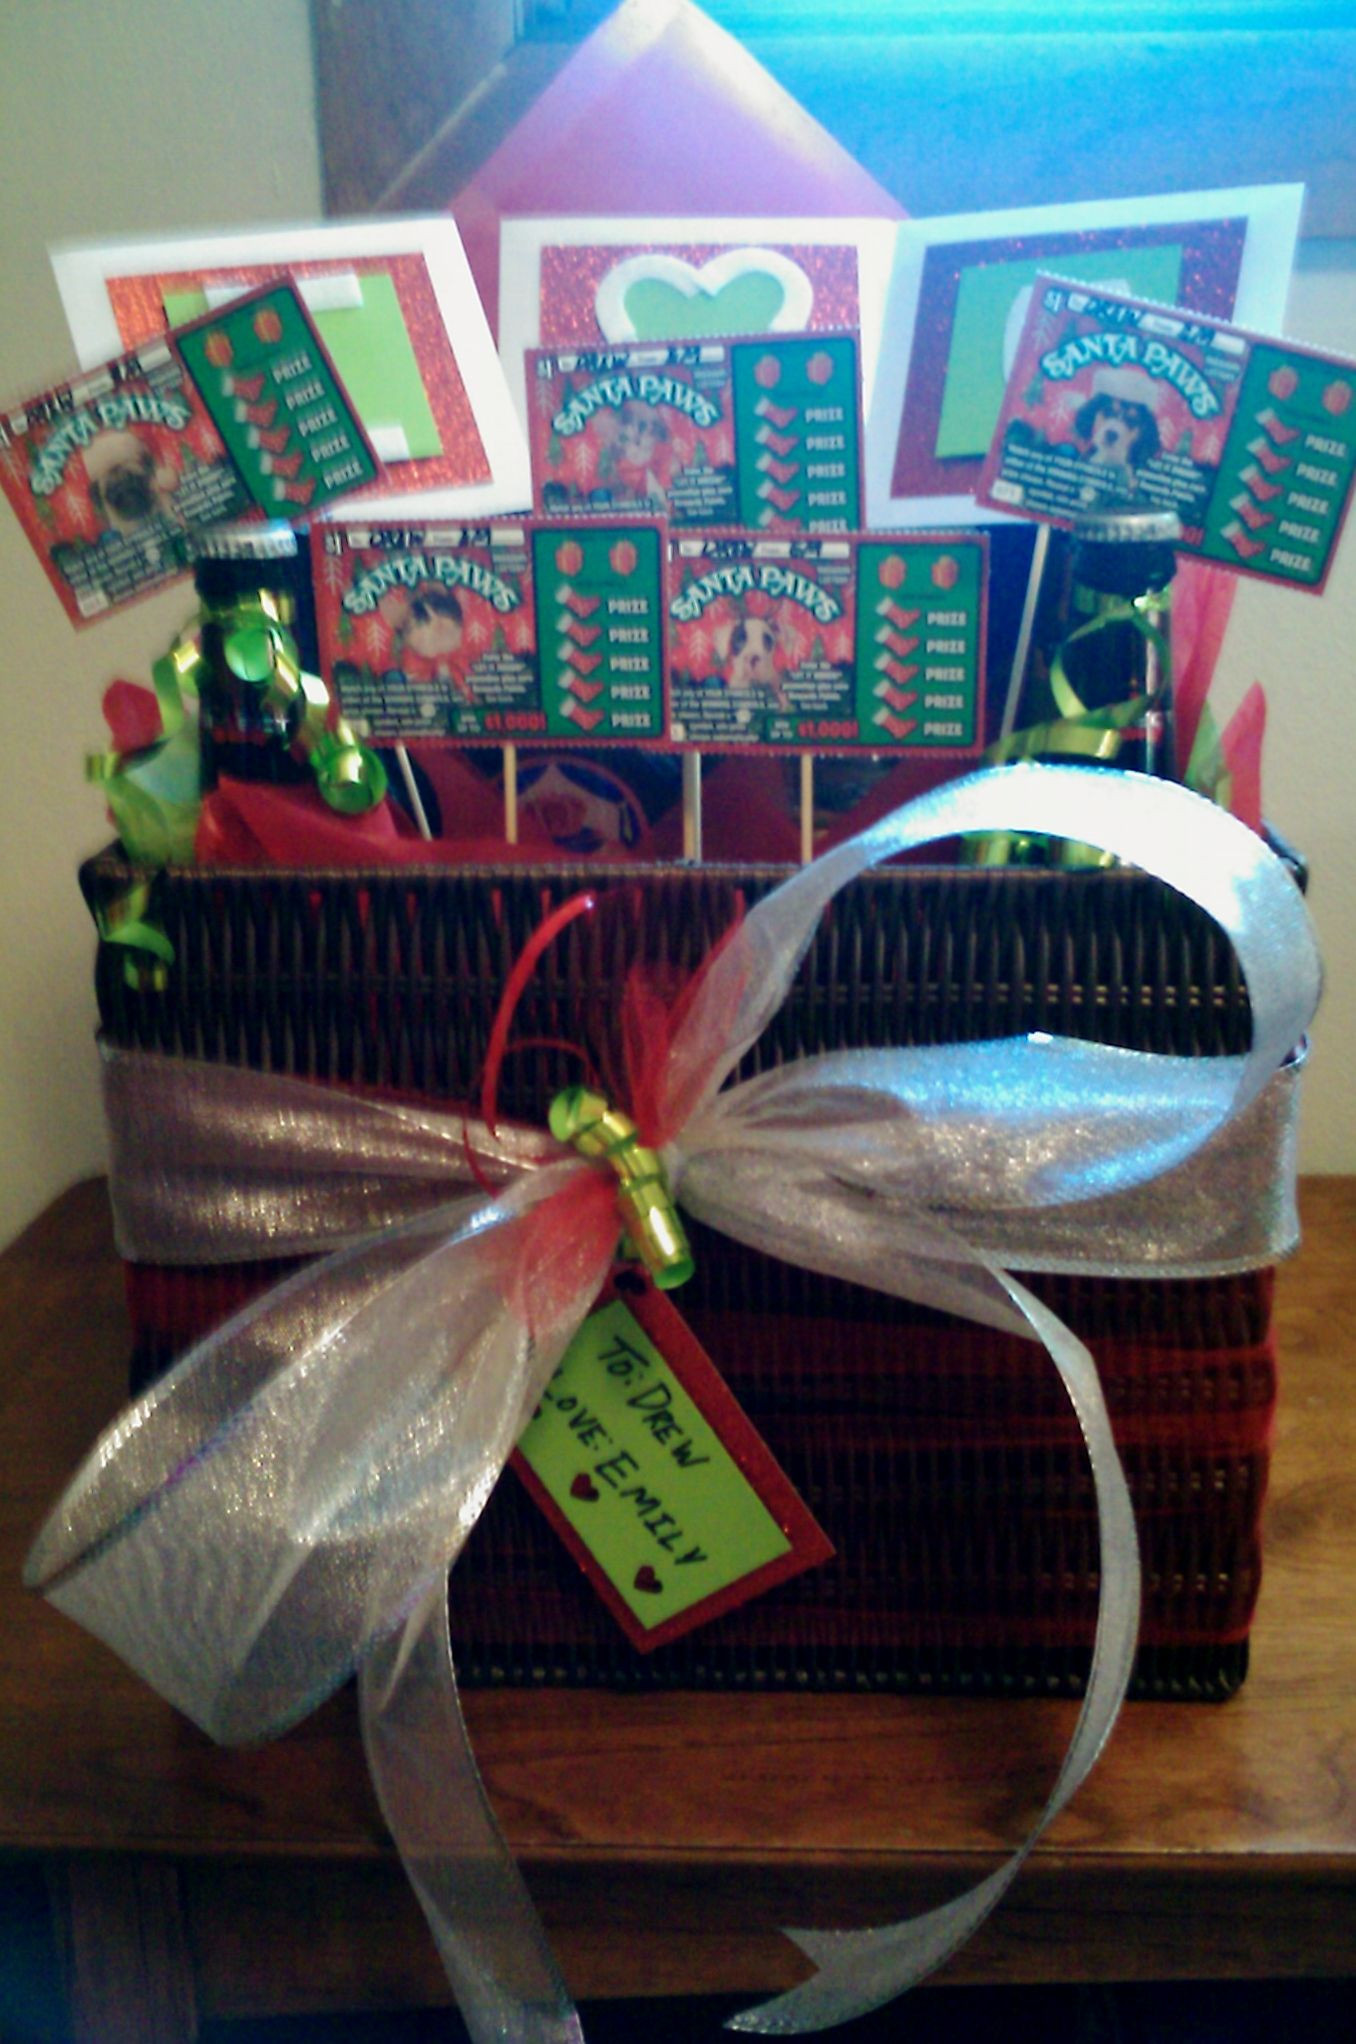 Lottery Ticket Christmas Gift Ideas
 A Christmas Gift Basket Idea Includes themed lottery